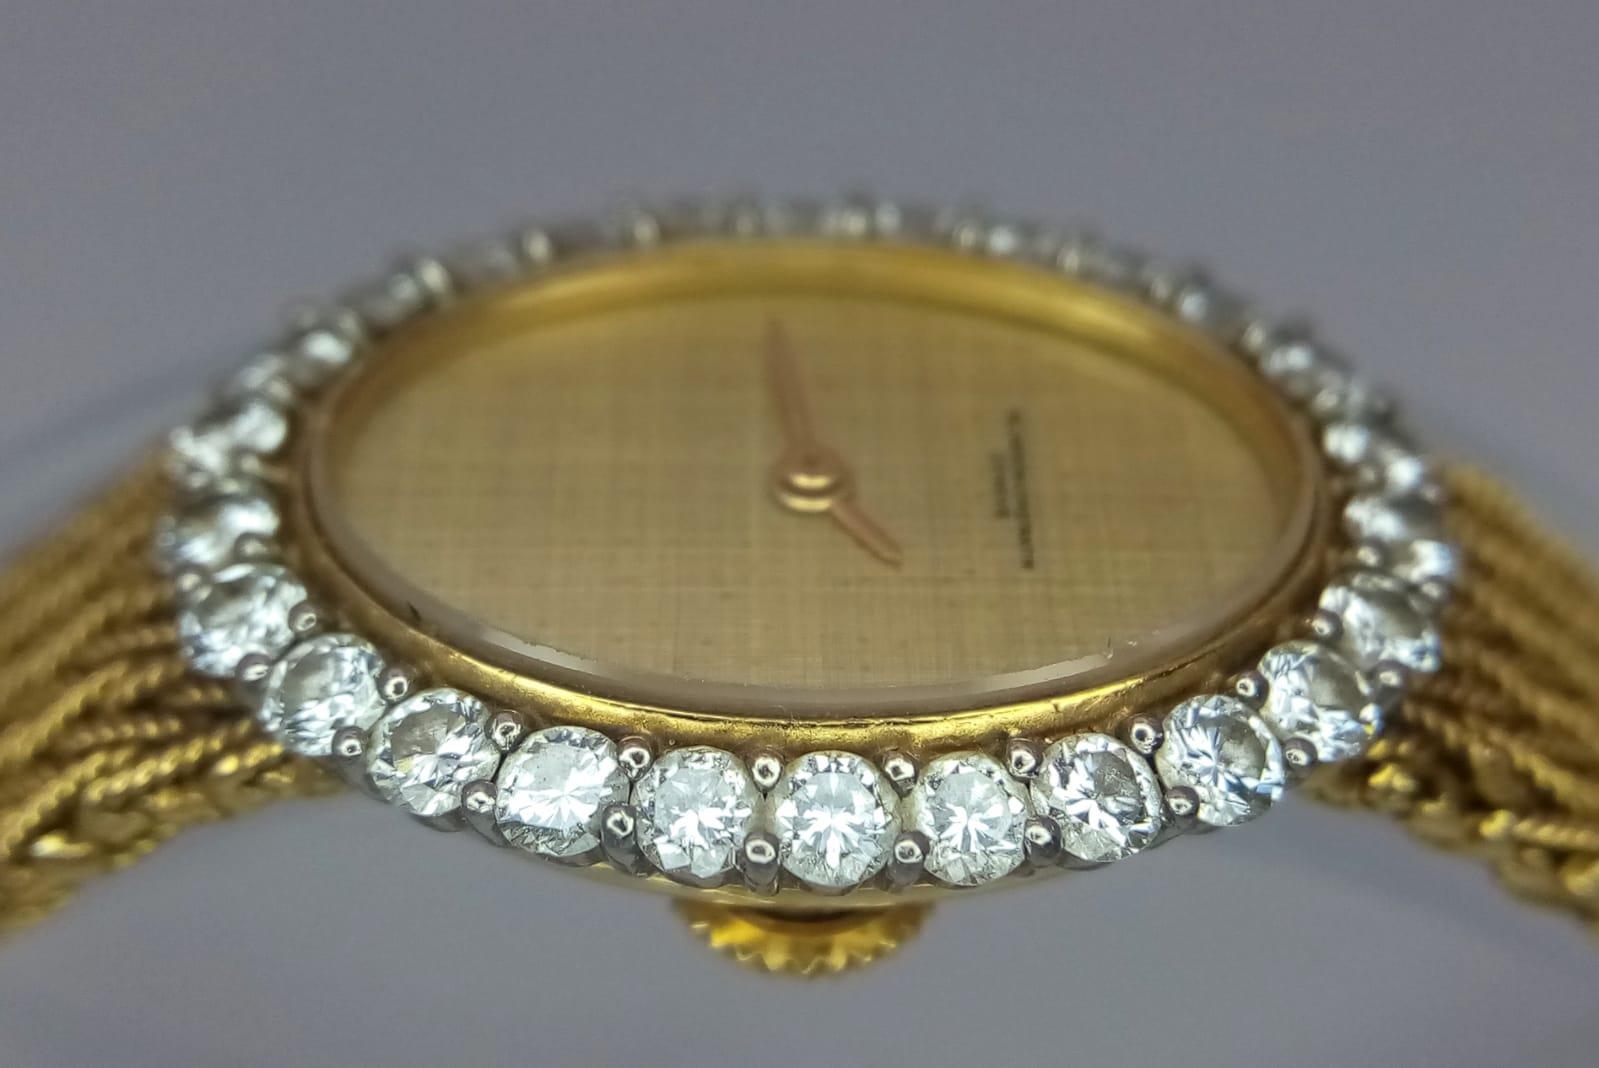 A Vacheron-Constantin 18K Yellow Gold and Diamond Ladies Watch. Gold bracelet and oval case - - Image 4 of 9